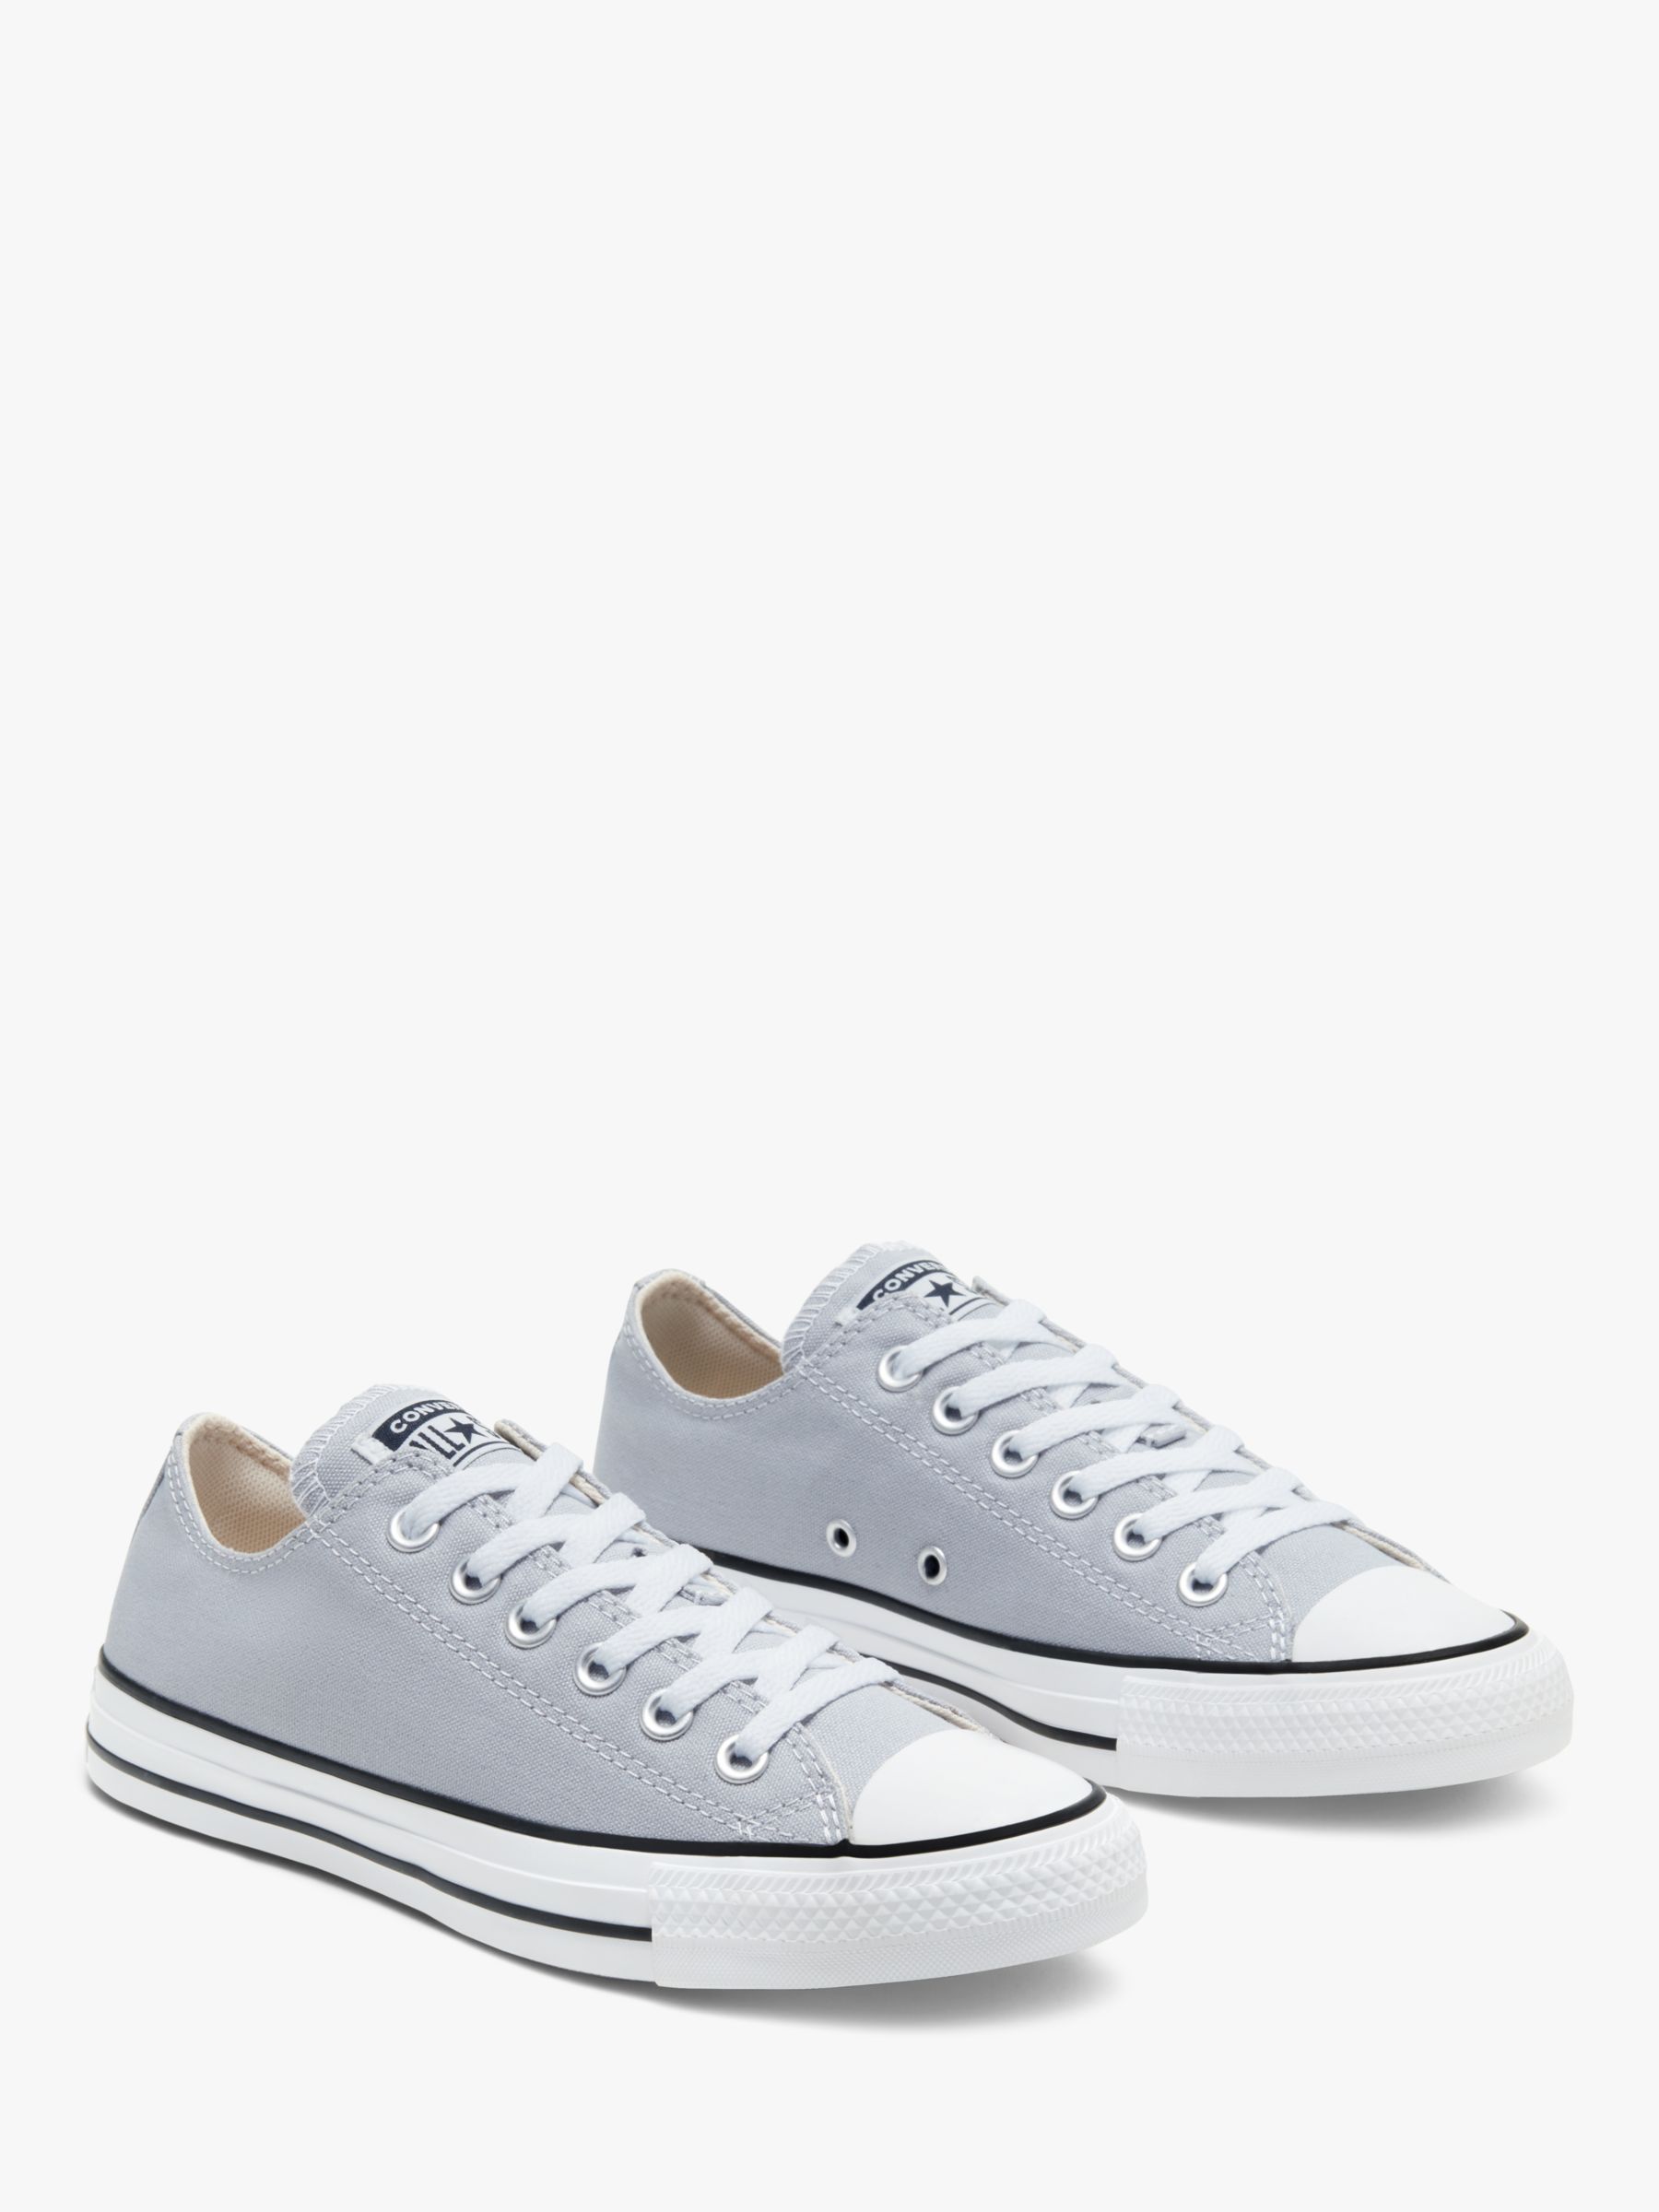 converse trainers